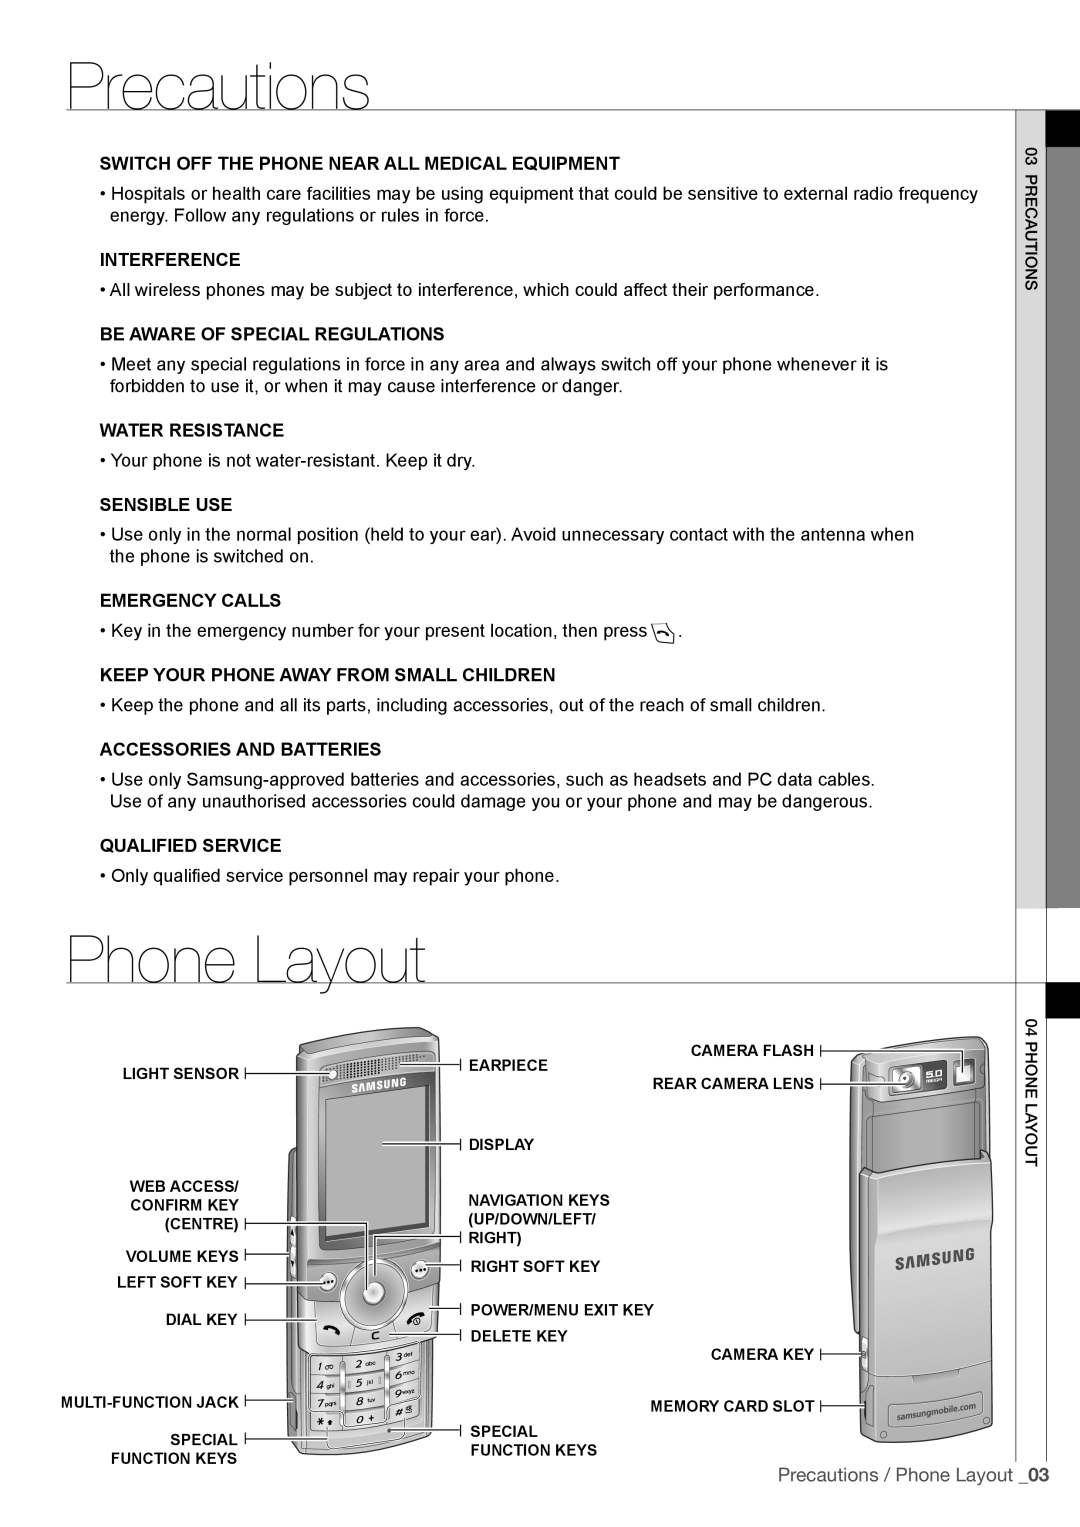 Samsung SGH-G600 quick start Precautions / Phone Layout, Switch off the phone near all medical equipment, Interference 